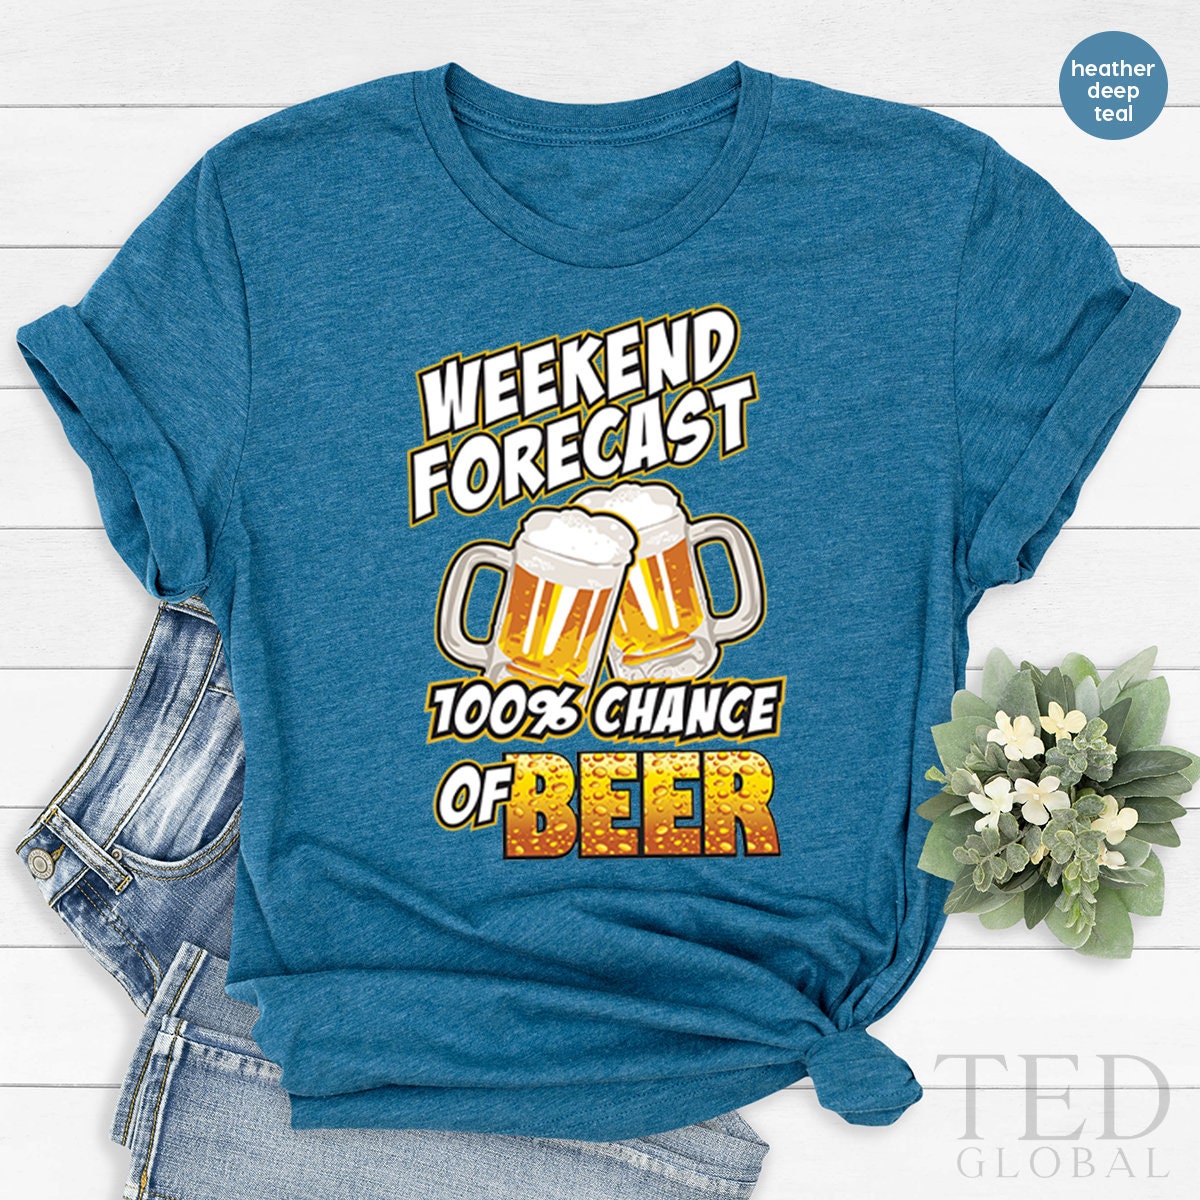 Day Drinking Shirt,Weekend Shirt,Beer T Shirt,Alcohol Shirt,Weekend Forecast %100 Chance Of Beer Shirt,Beer Shirt,Beer Lovers Shirt - Fastdeliverytees.com